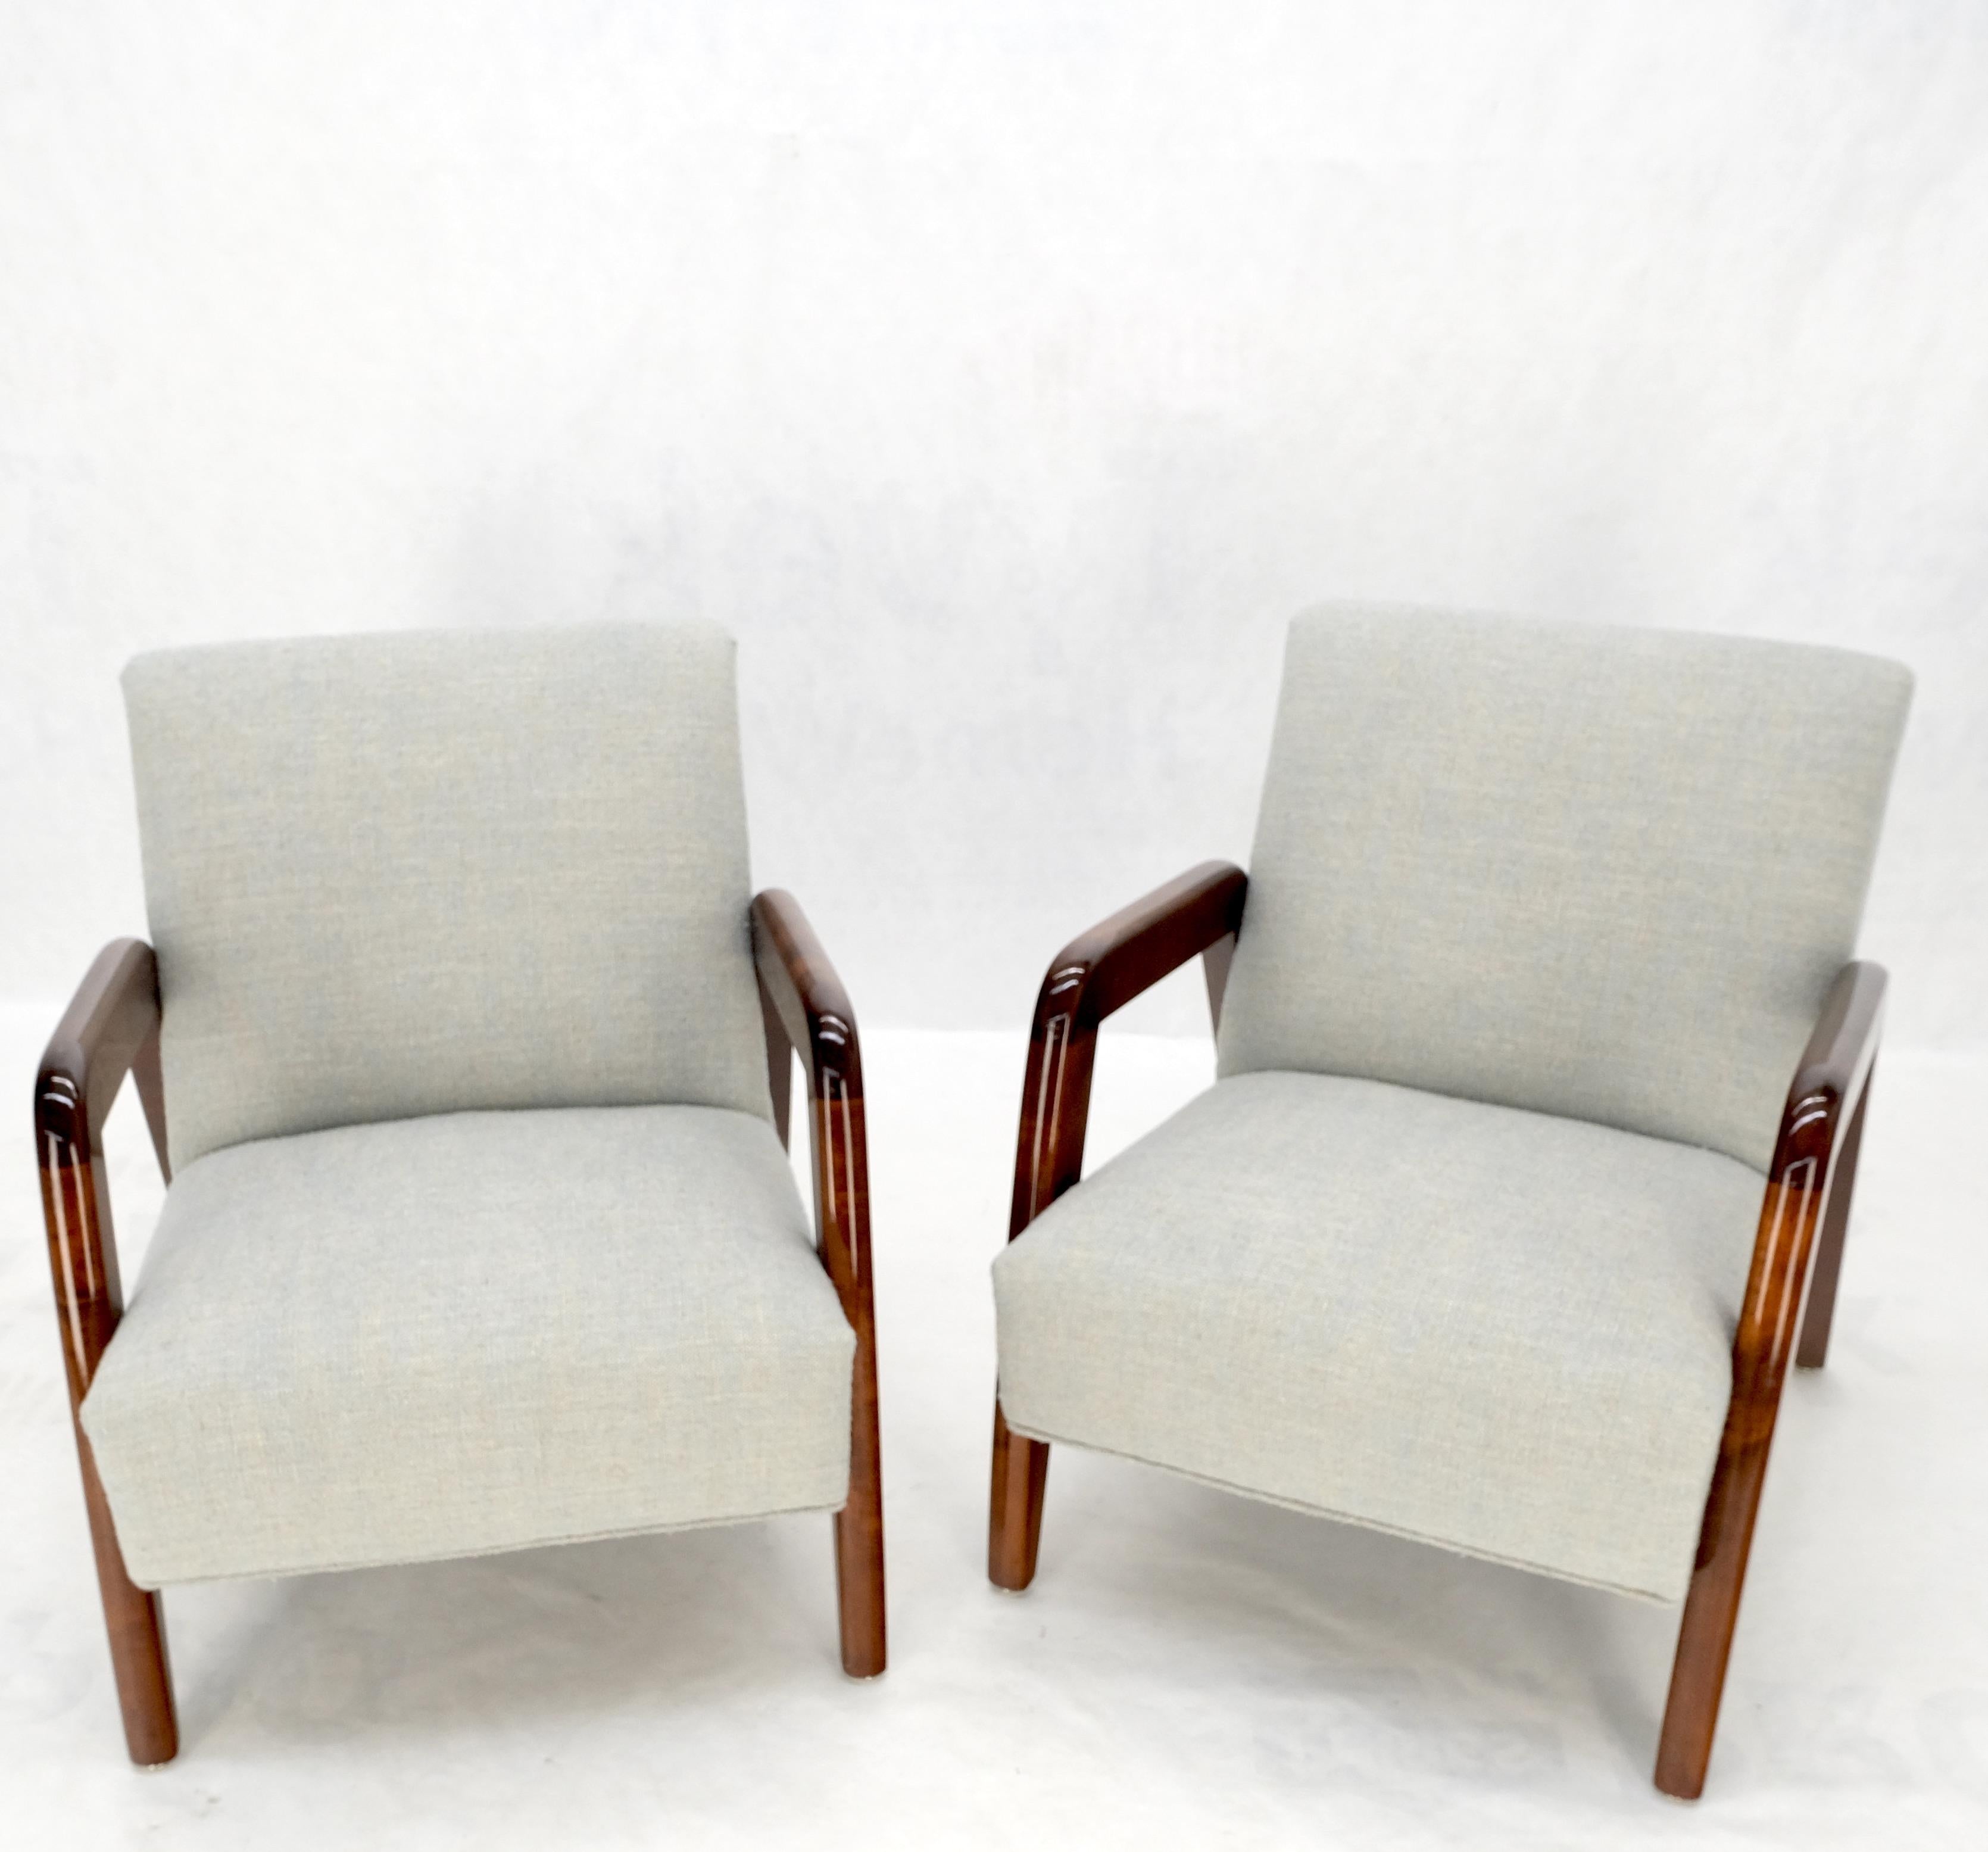 Pair New Leinen Polsterung Heavy Solid Maple Frames American  Lounge Chairs MINT! im Angebot 6